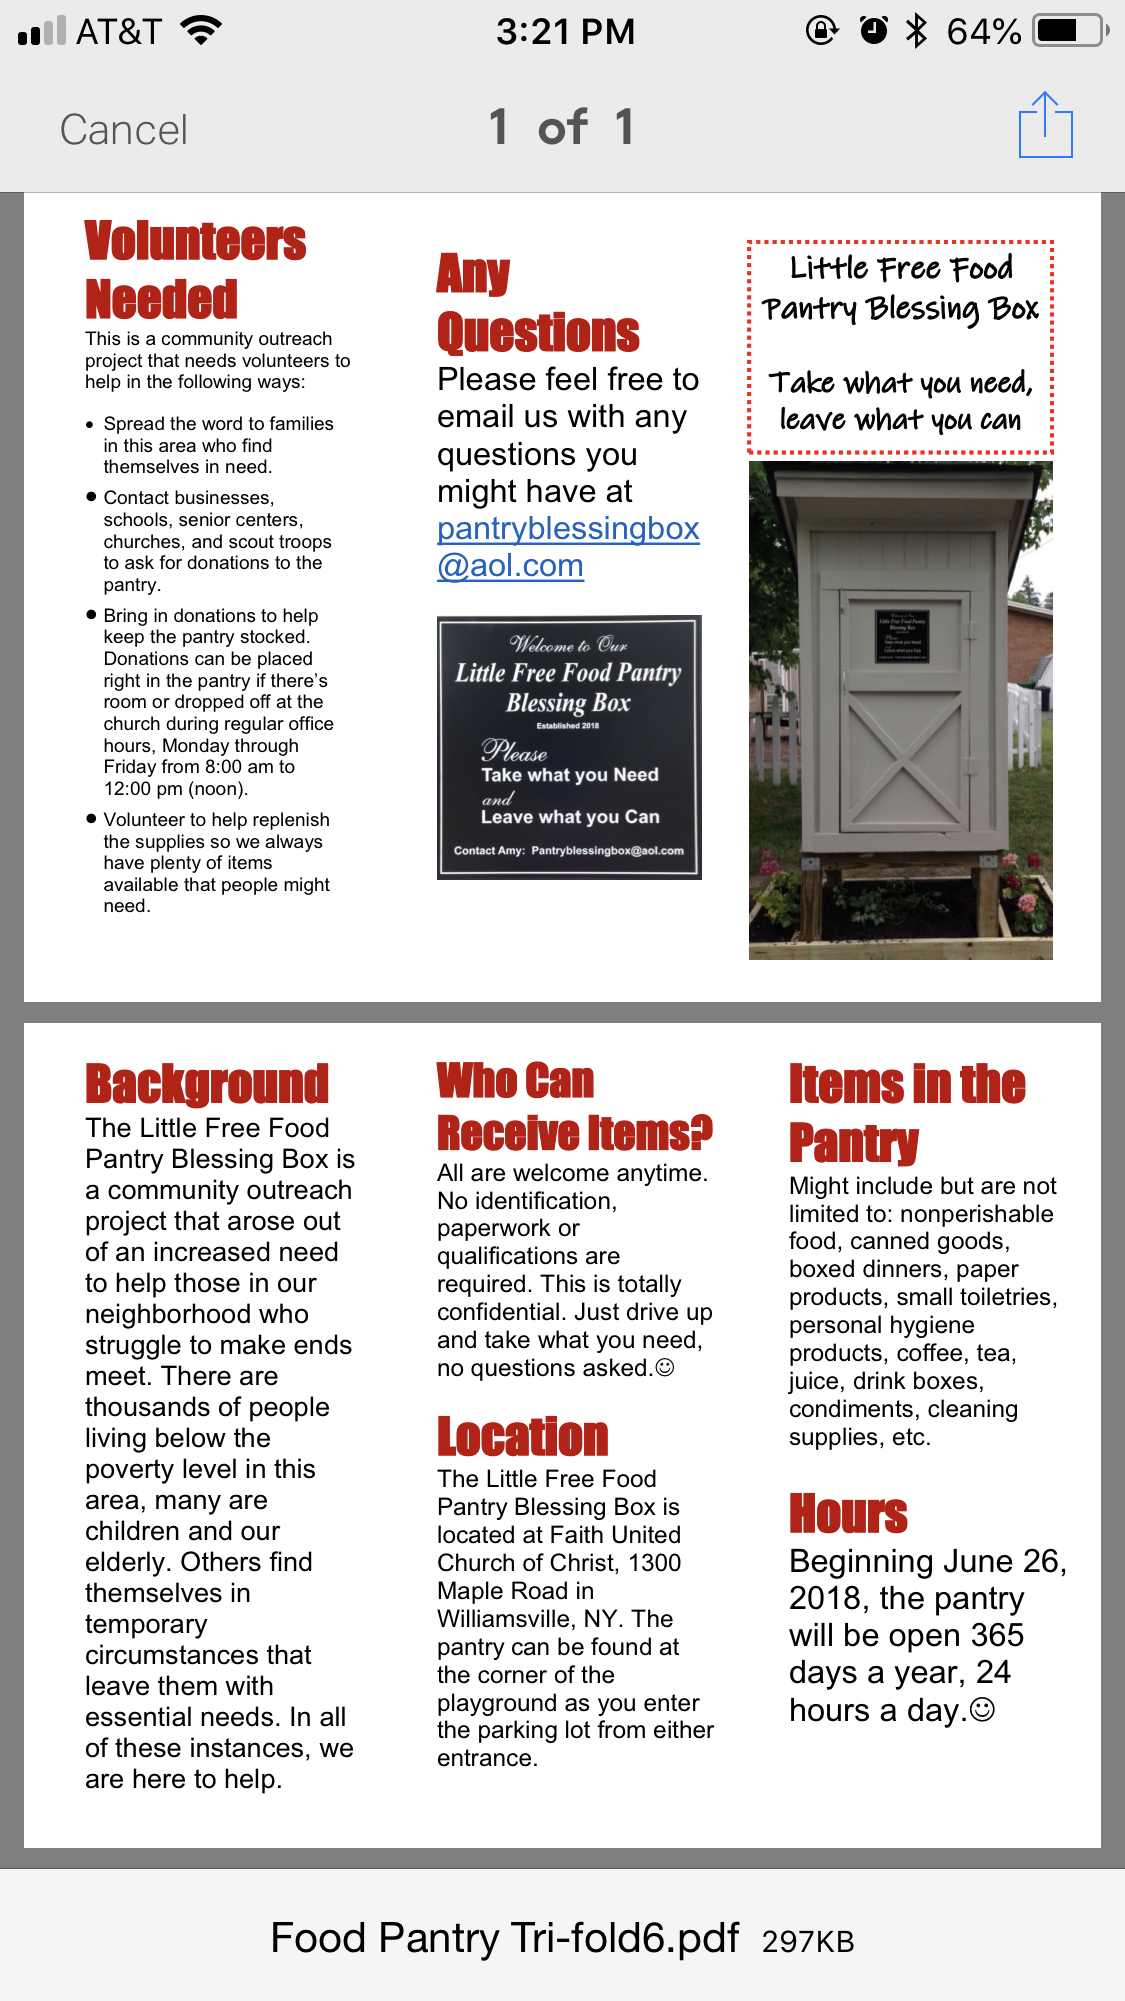 Little Free Food Pantry Blessing Box Photo 2